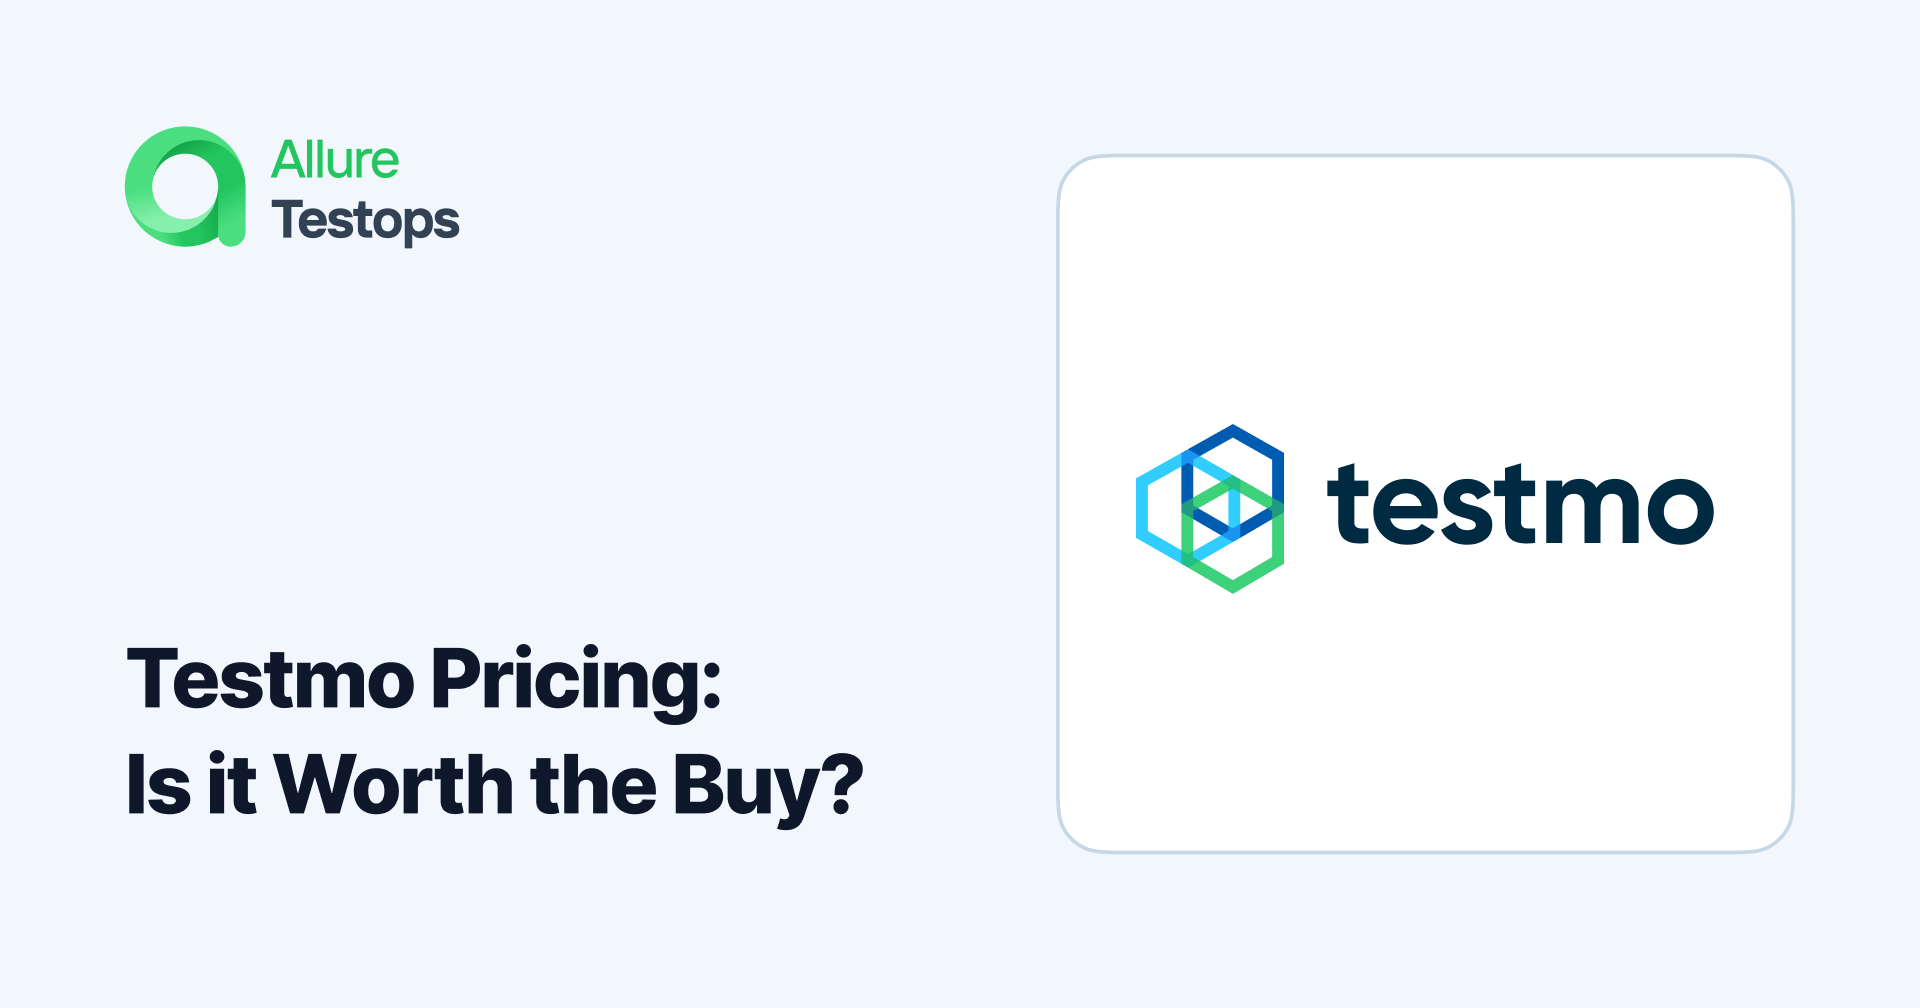 Testmo Pricing: Is it Worth the Buy?